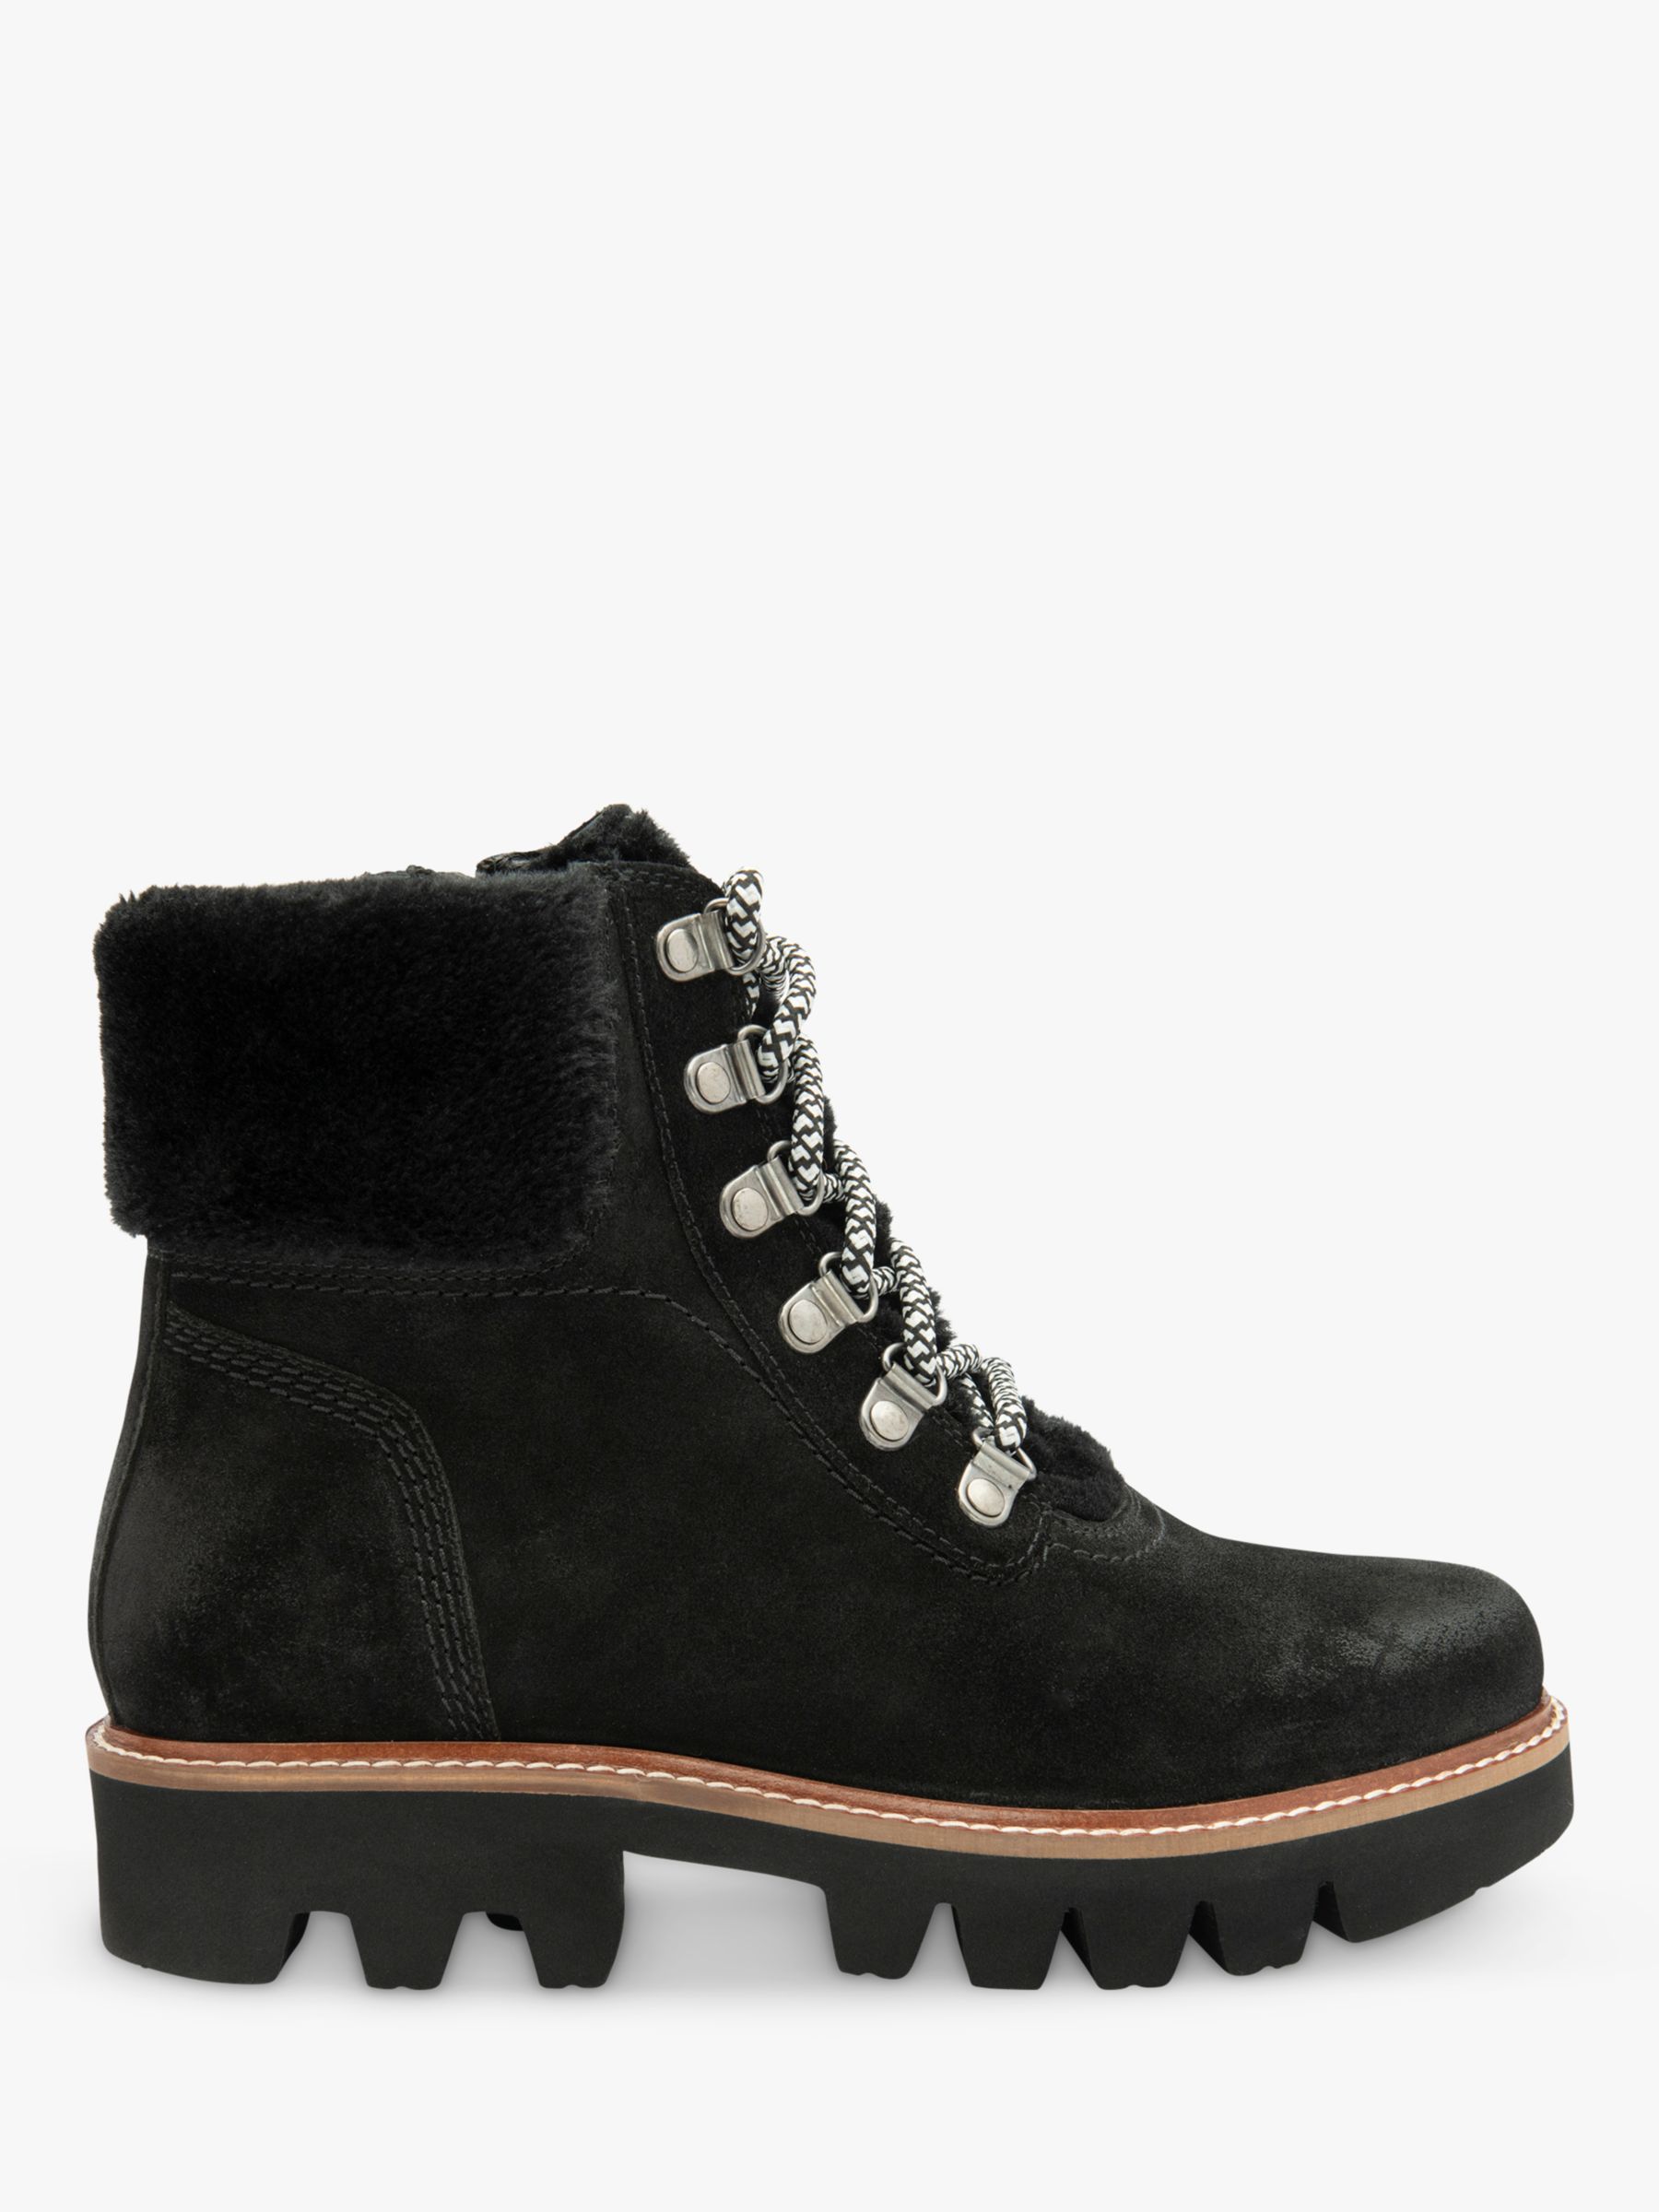 Ravel Ventry Suede Ankle Boots, Black at John Lewis & Partners